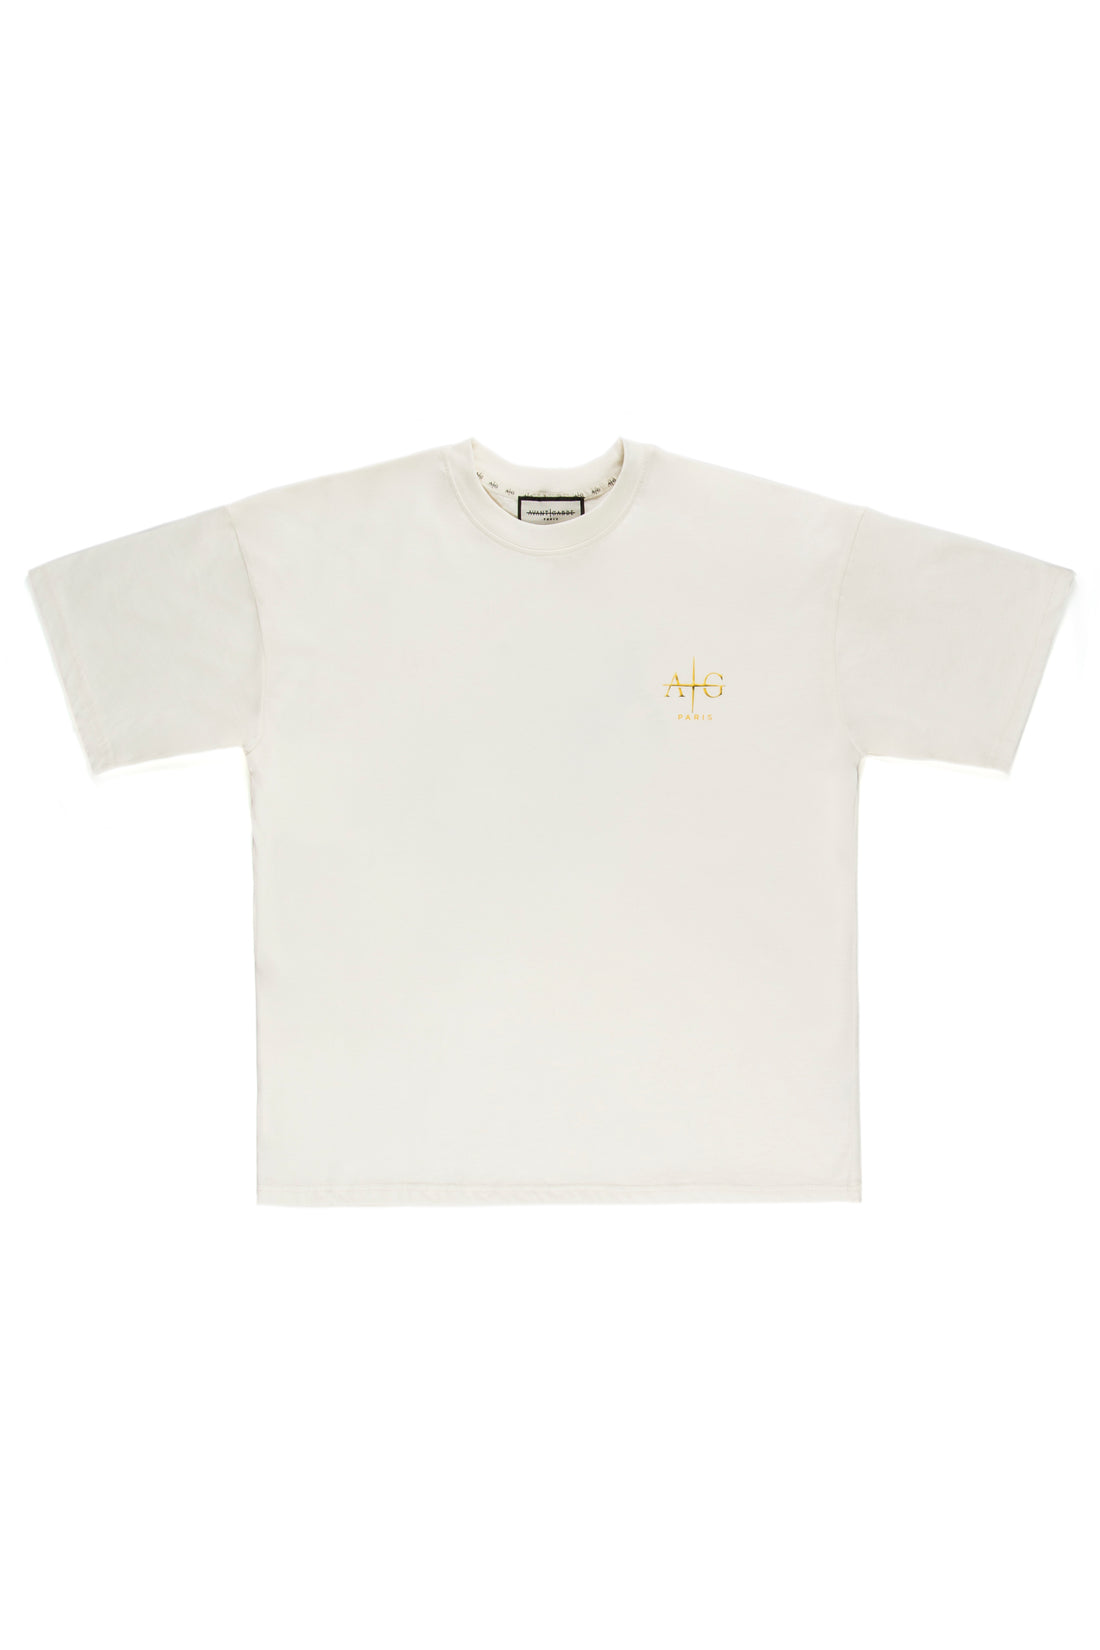 Front of white dove graphic tee